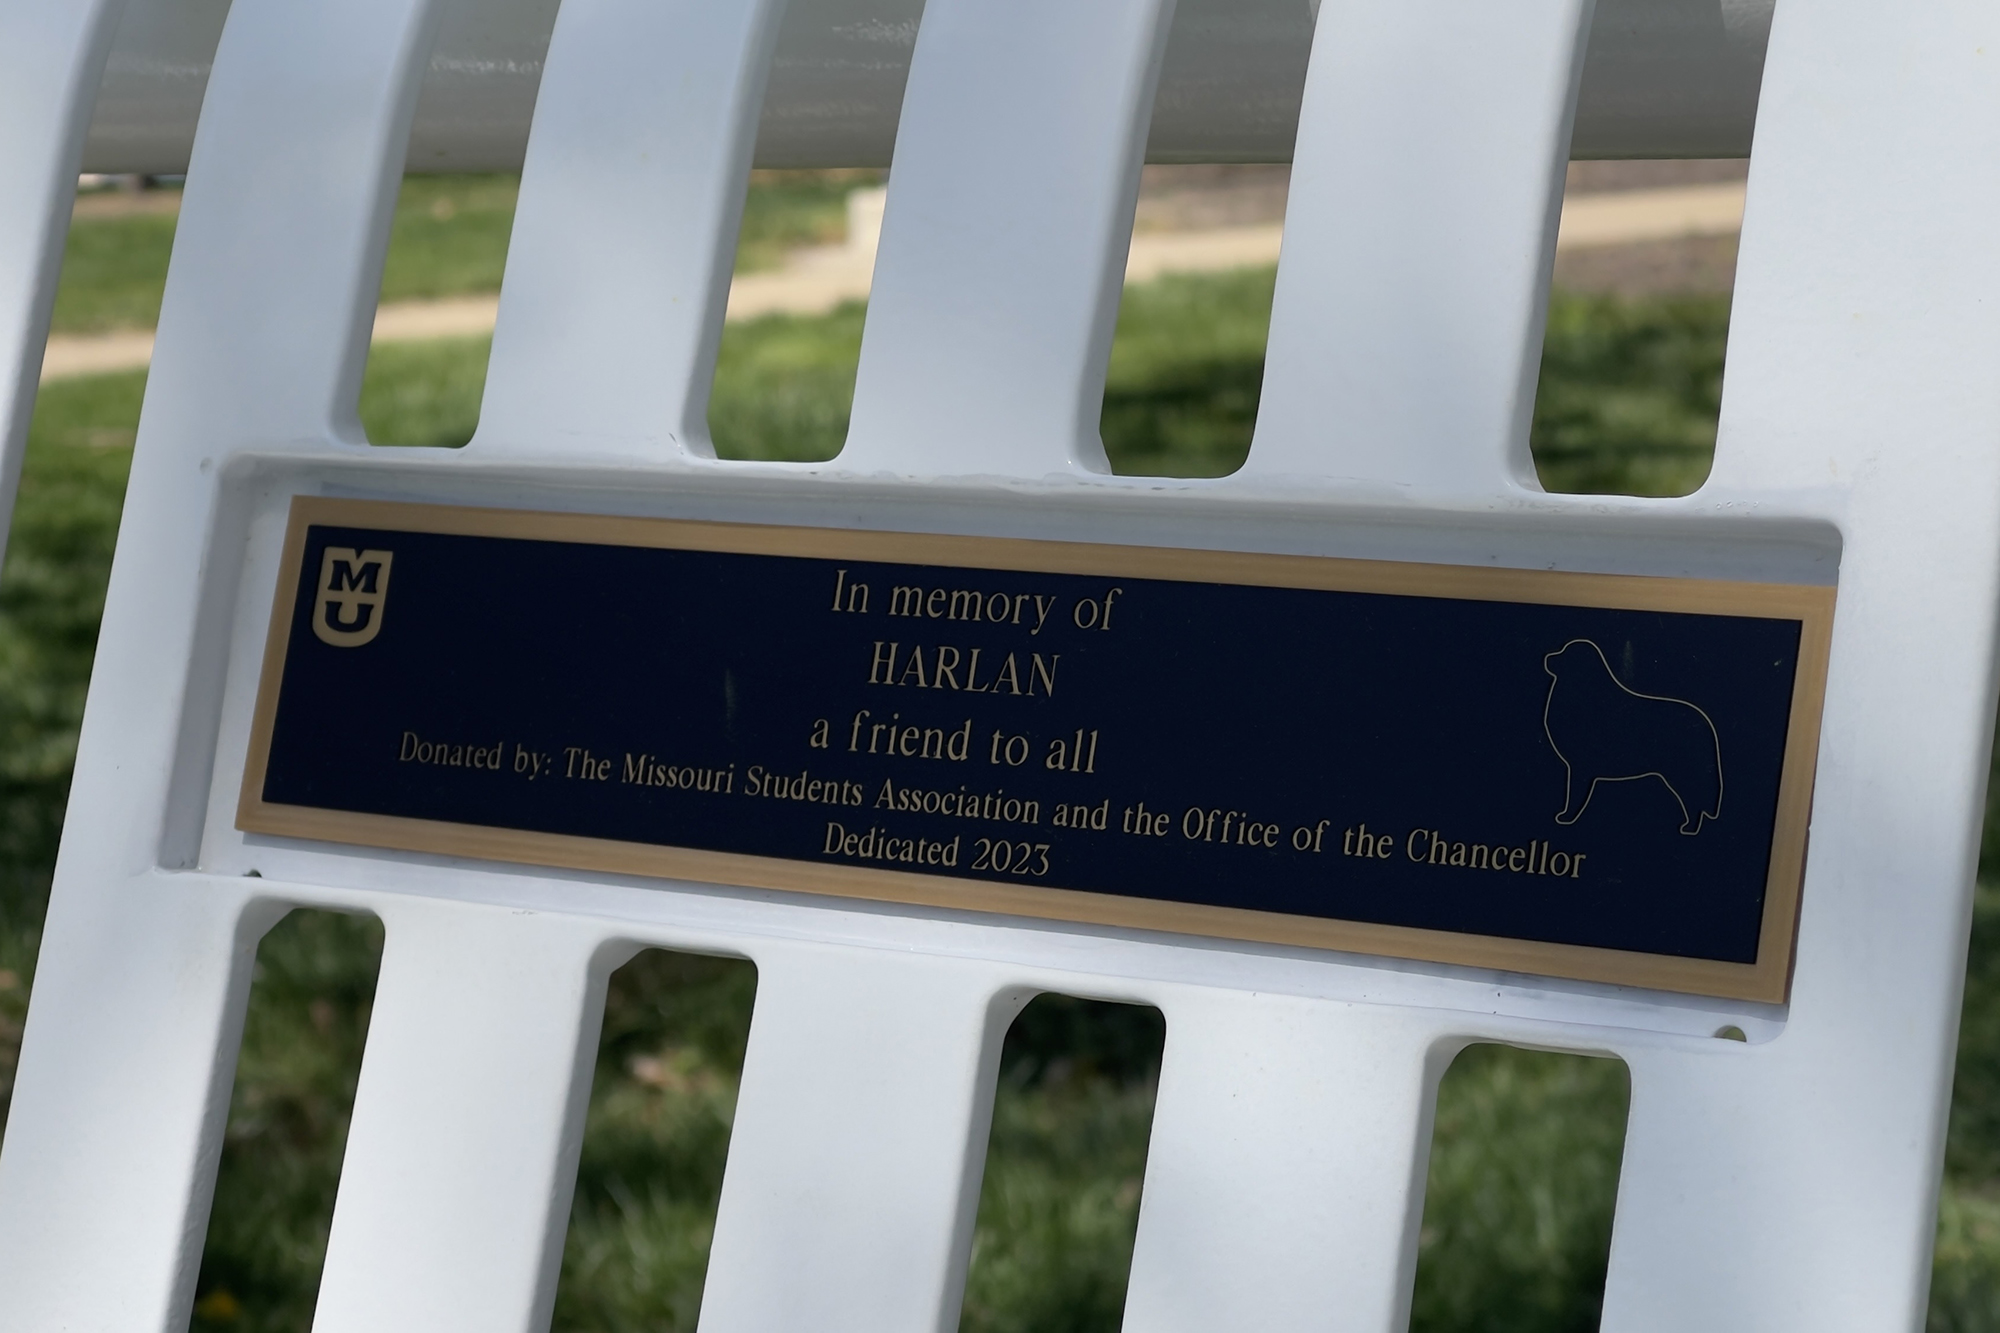 close-up of a plaque that says, "in memory of harlan. a friend to all. donated by: the missouri students association and the office of the chancellor. dedicated 2023"